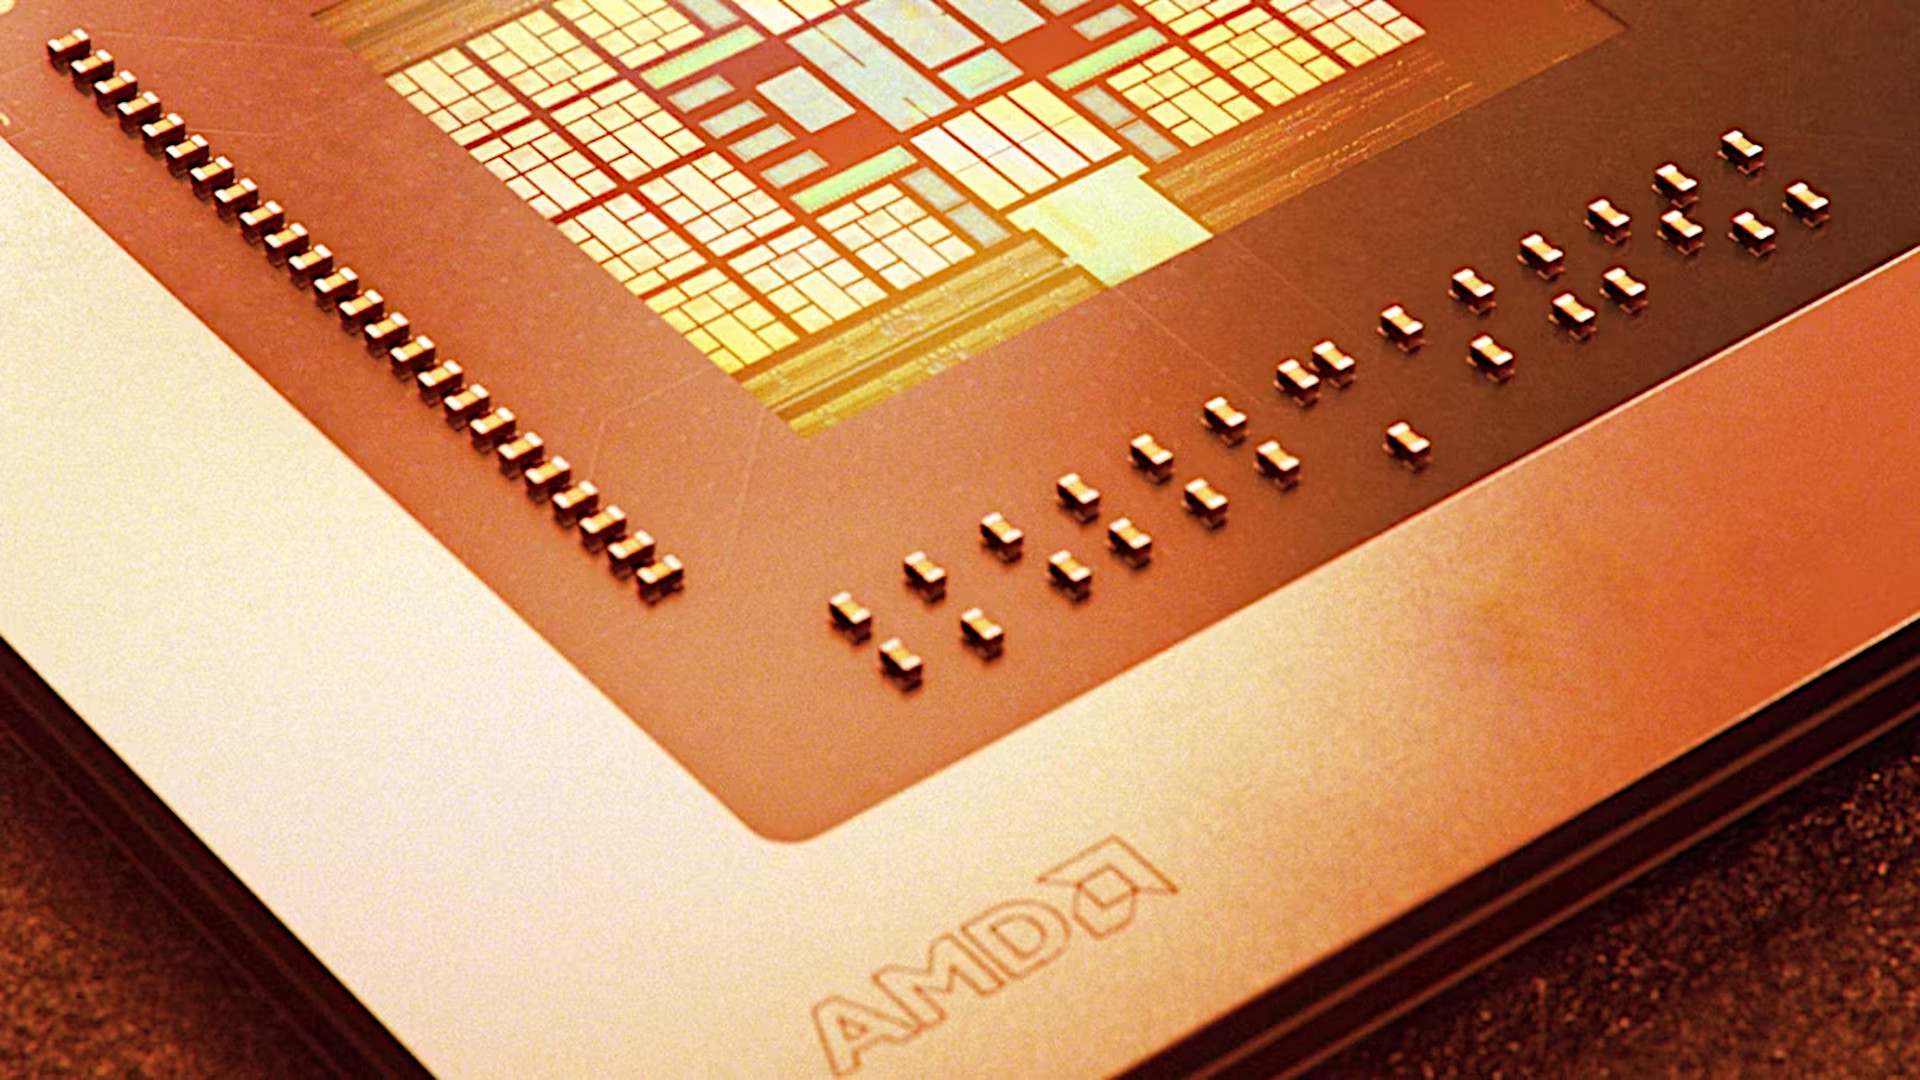 AMD confirms its next Ryzen CPU series, but not in the way you'd think